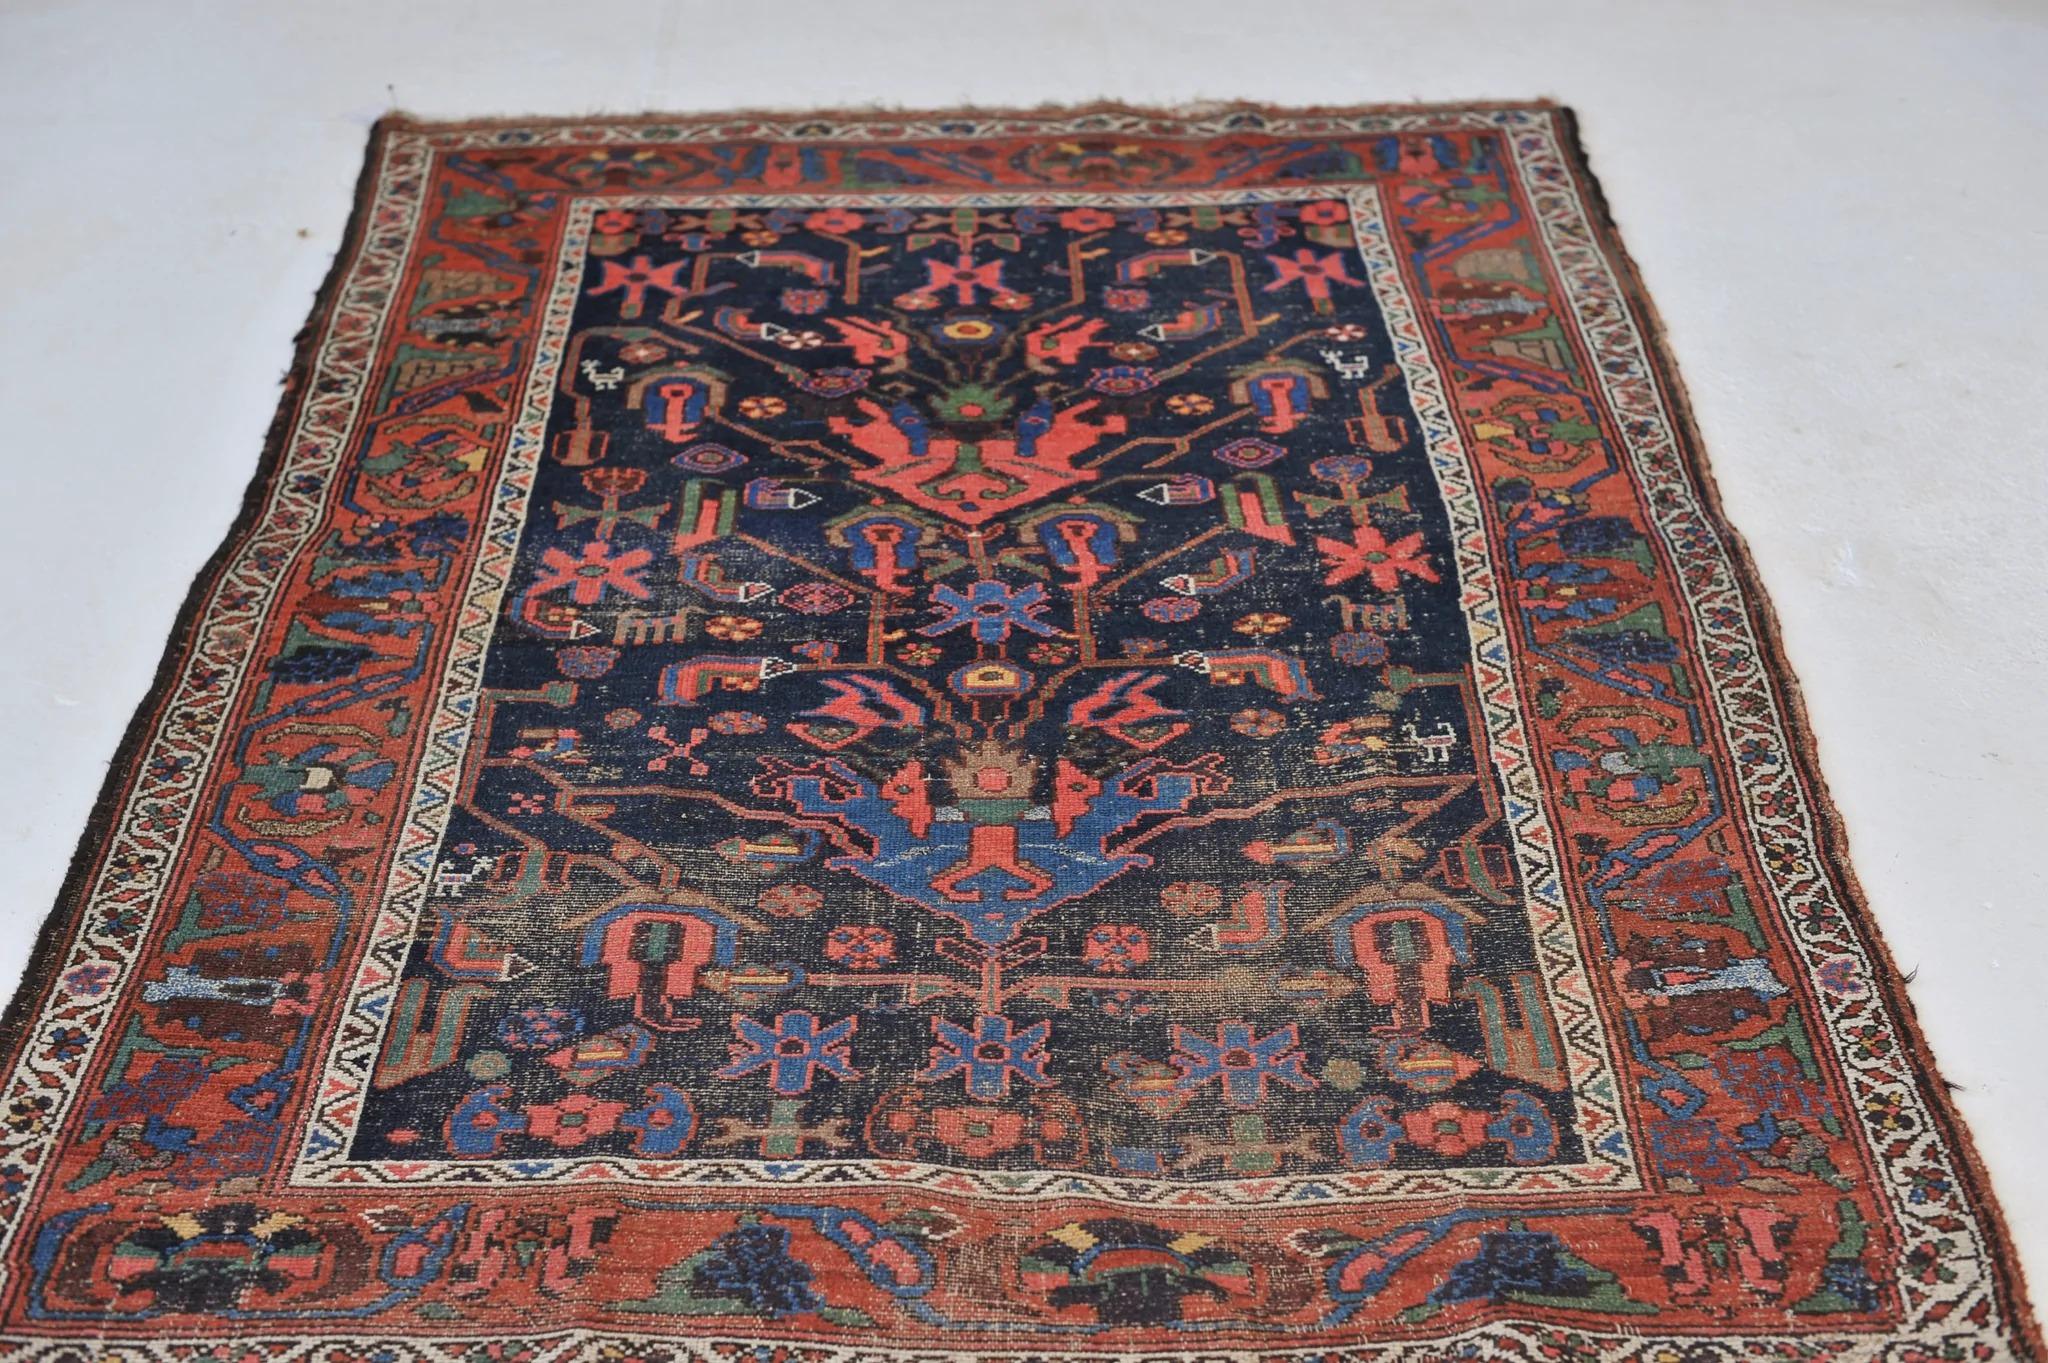 Mystical Highly Attractive Navy, Green, Watermelon Antique rug

About: One of the most mystical rugs we've ever had in our collection. whoever ends up with this piece will truly have the joy of seeing pure antique village art every single day.